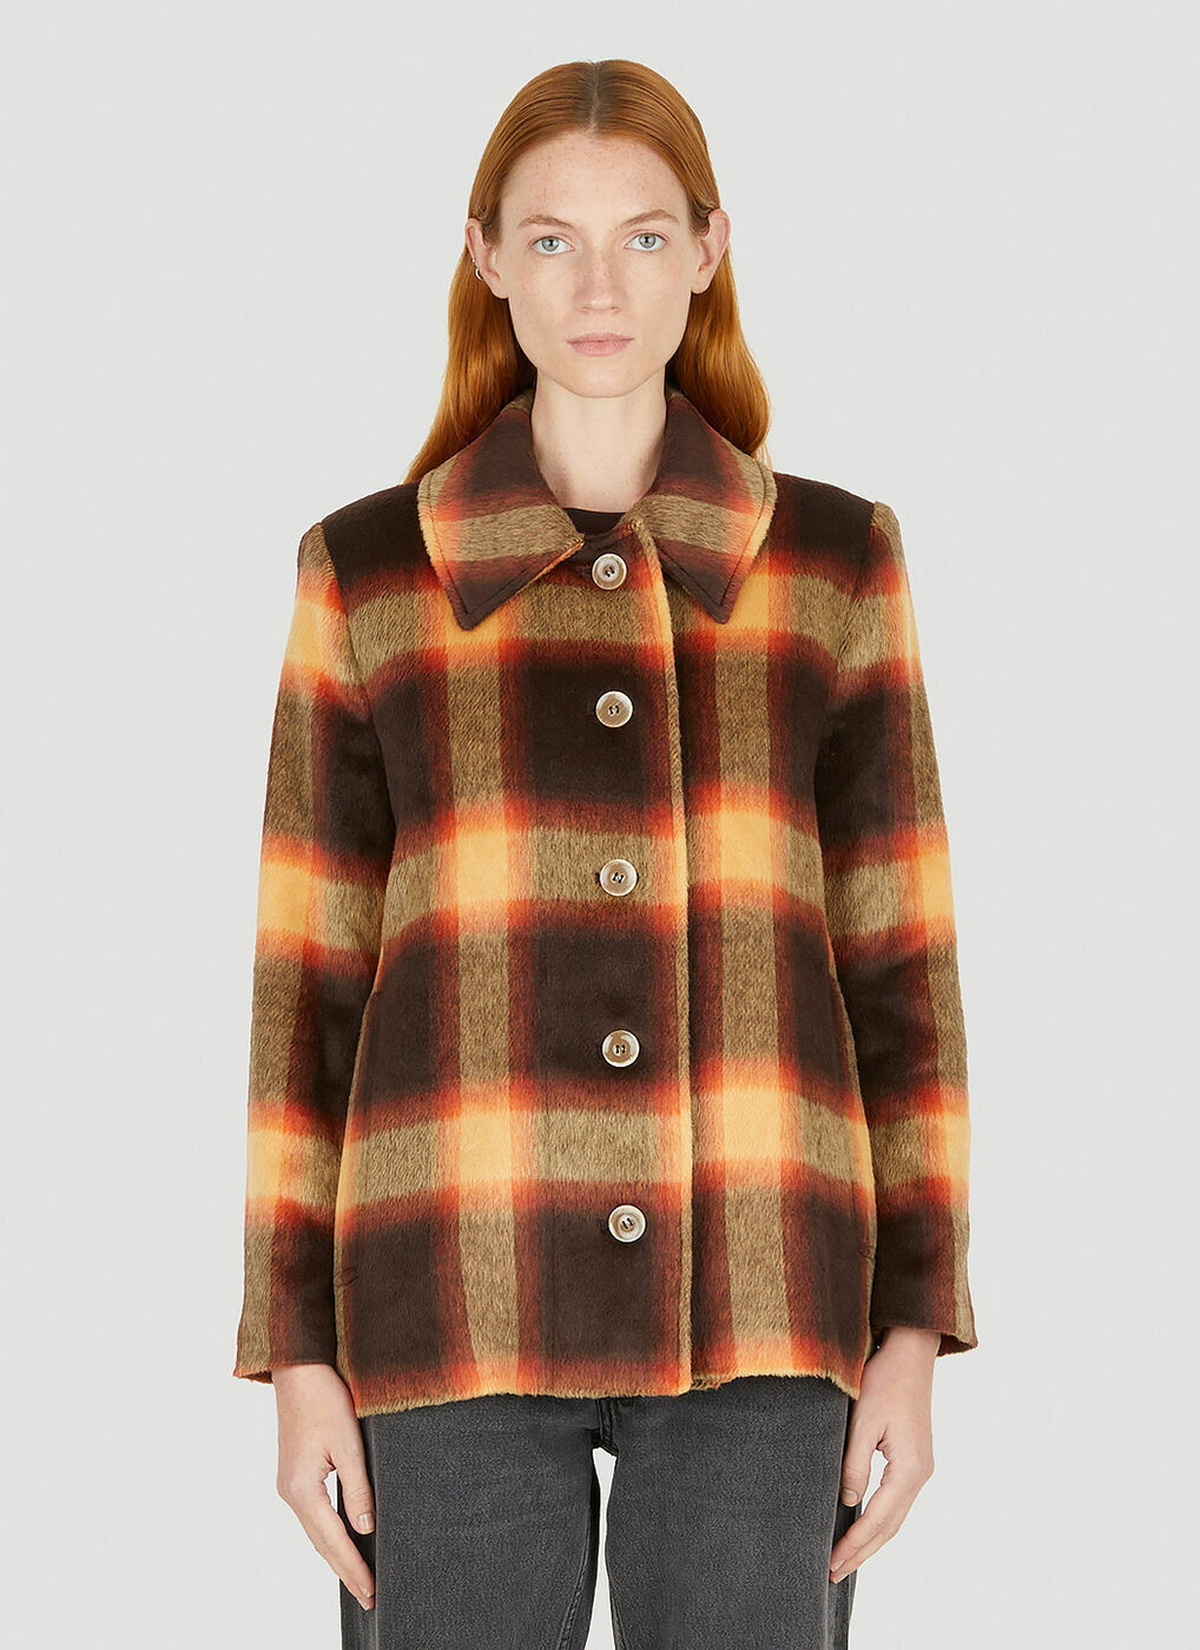 Nomad Plaid Jacket in Brown Rodebjer